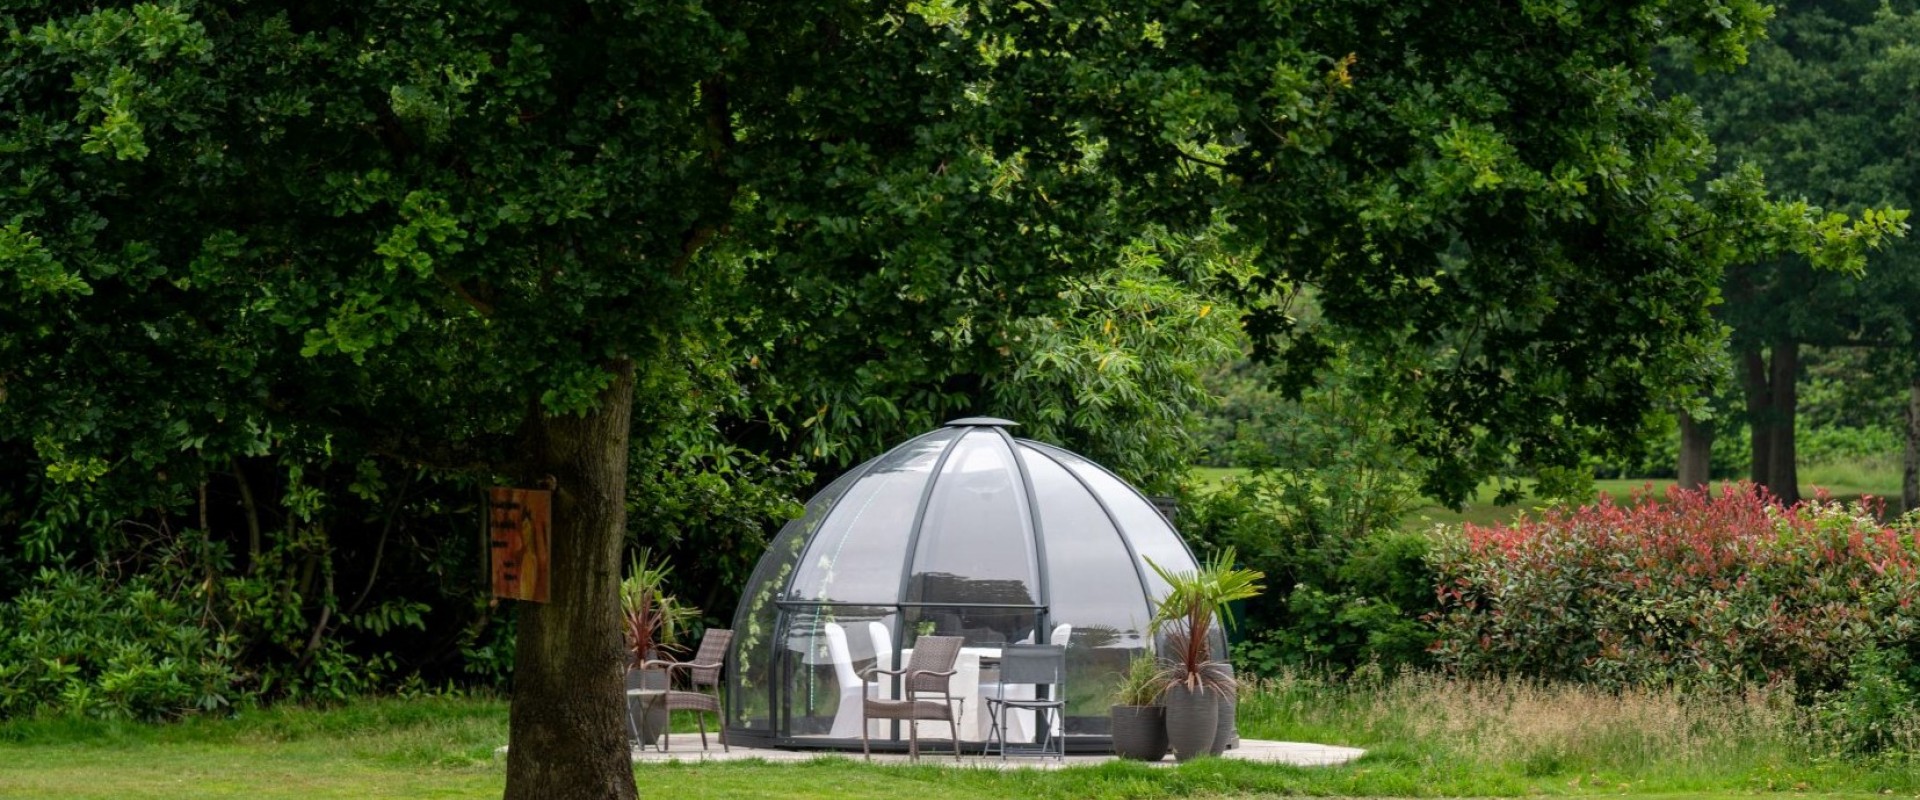 Dining Dome at Moor Hall